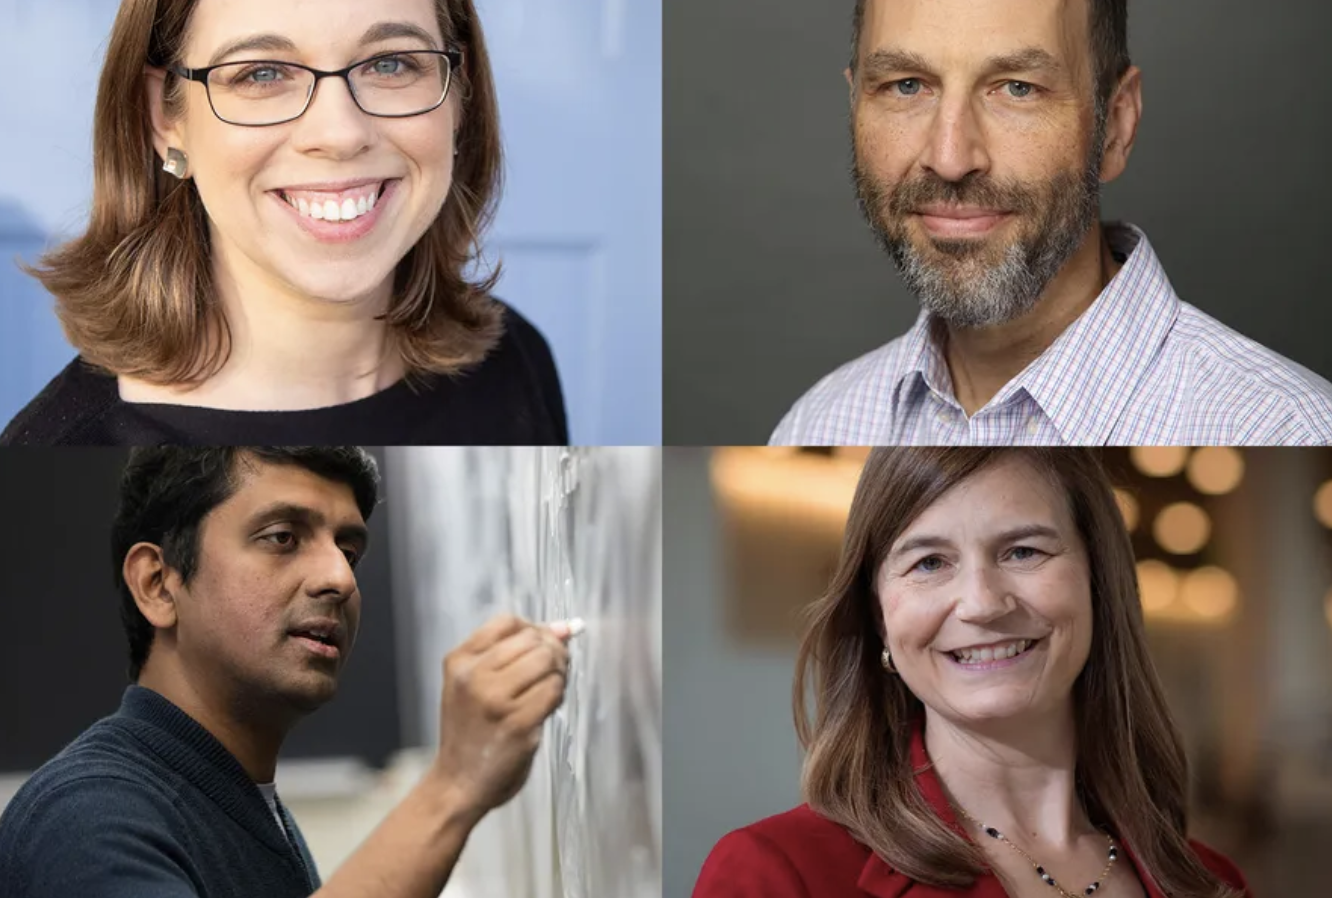 The 2024 MacVicar Faculty Fellows are (clockwise from top left): Emily Richmond Pollock, Karl Berggren, Andrea Campbell, and Vinod Vaikuntanathan. Photos (clockwise from top left): David Kinder, Elevin Studios, Gretchen Ertl, and Scott Brauer.